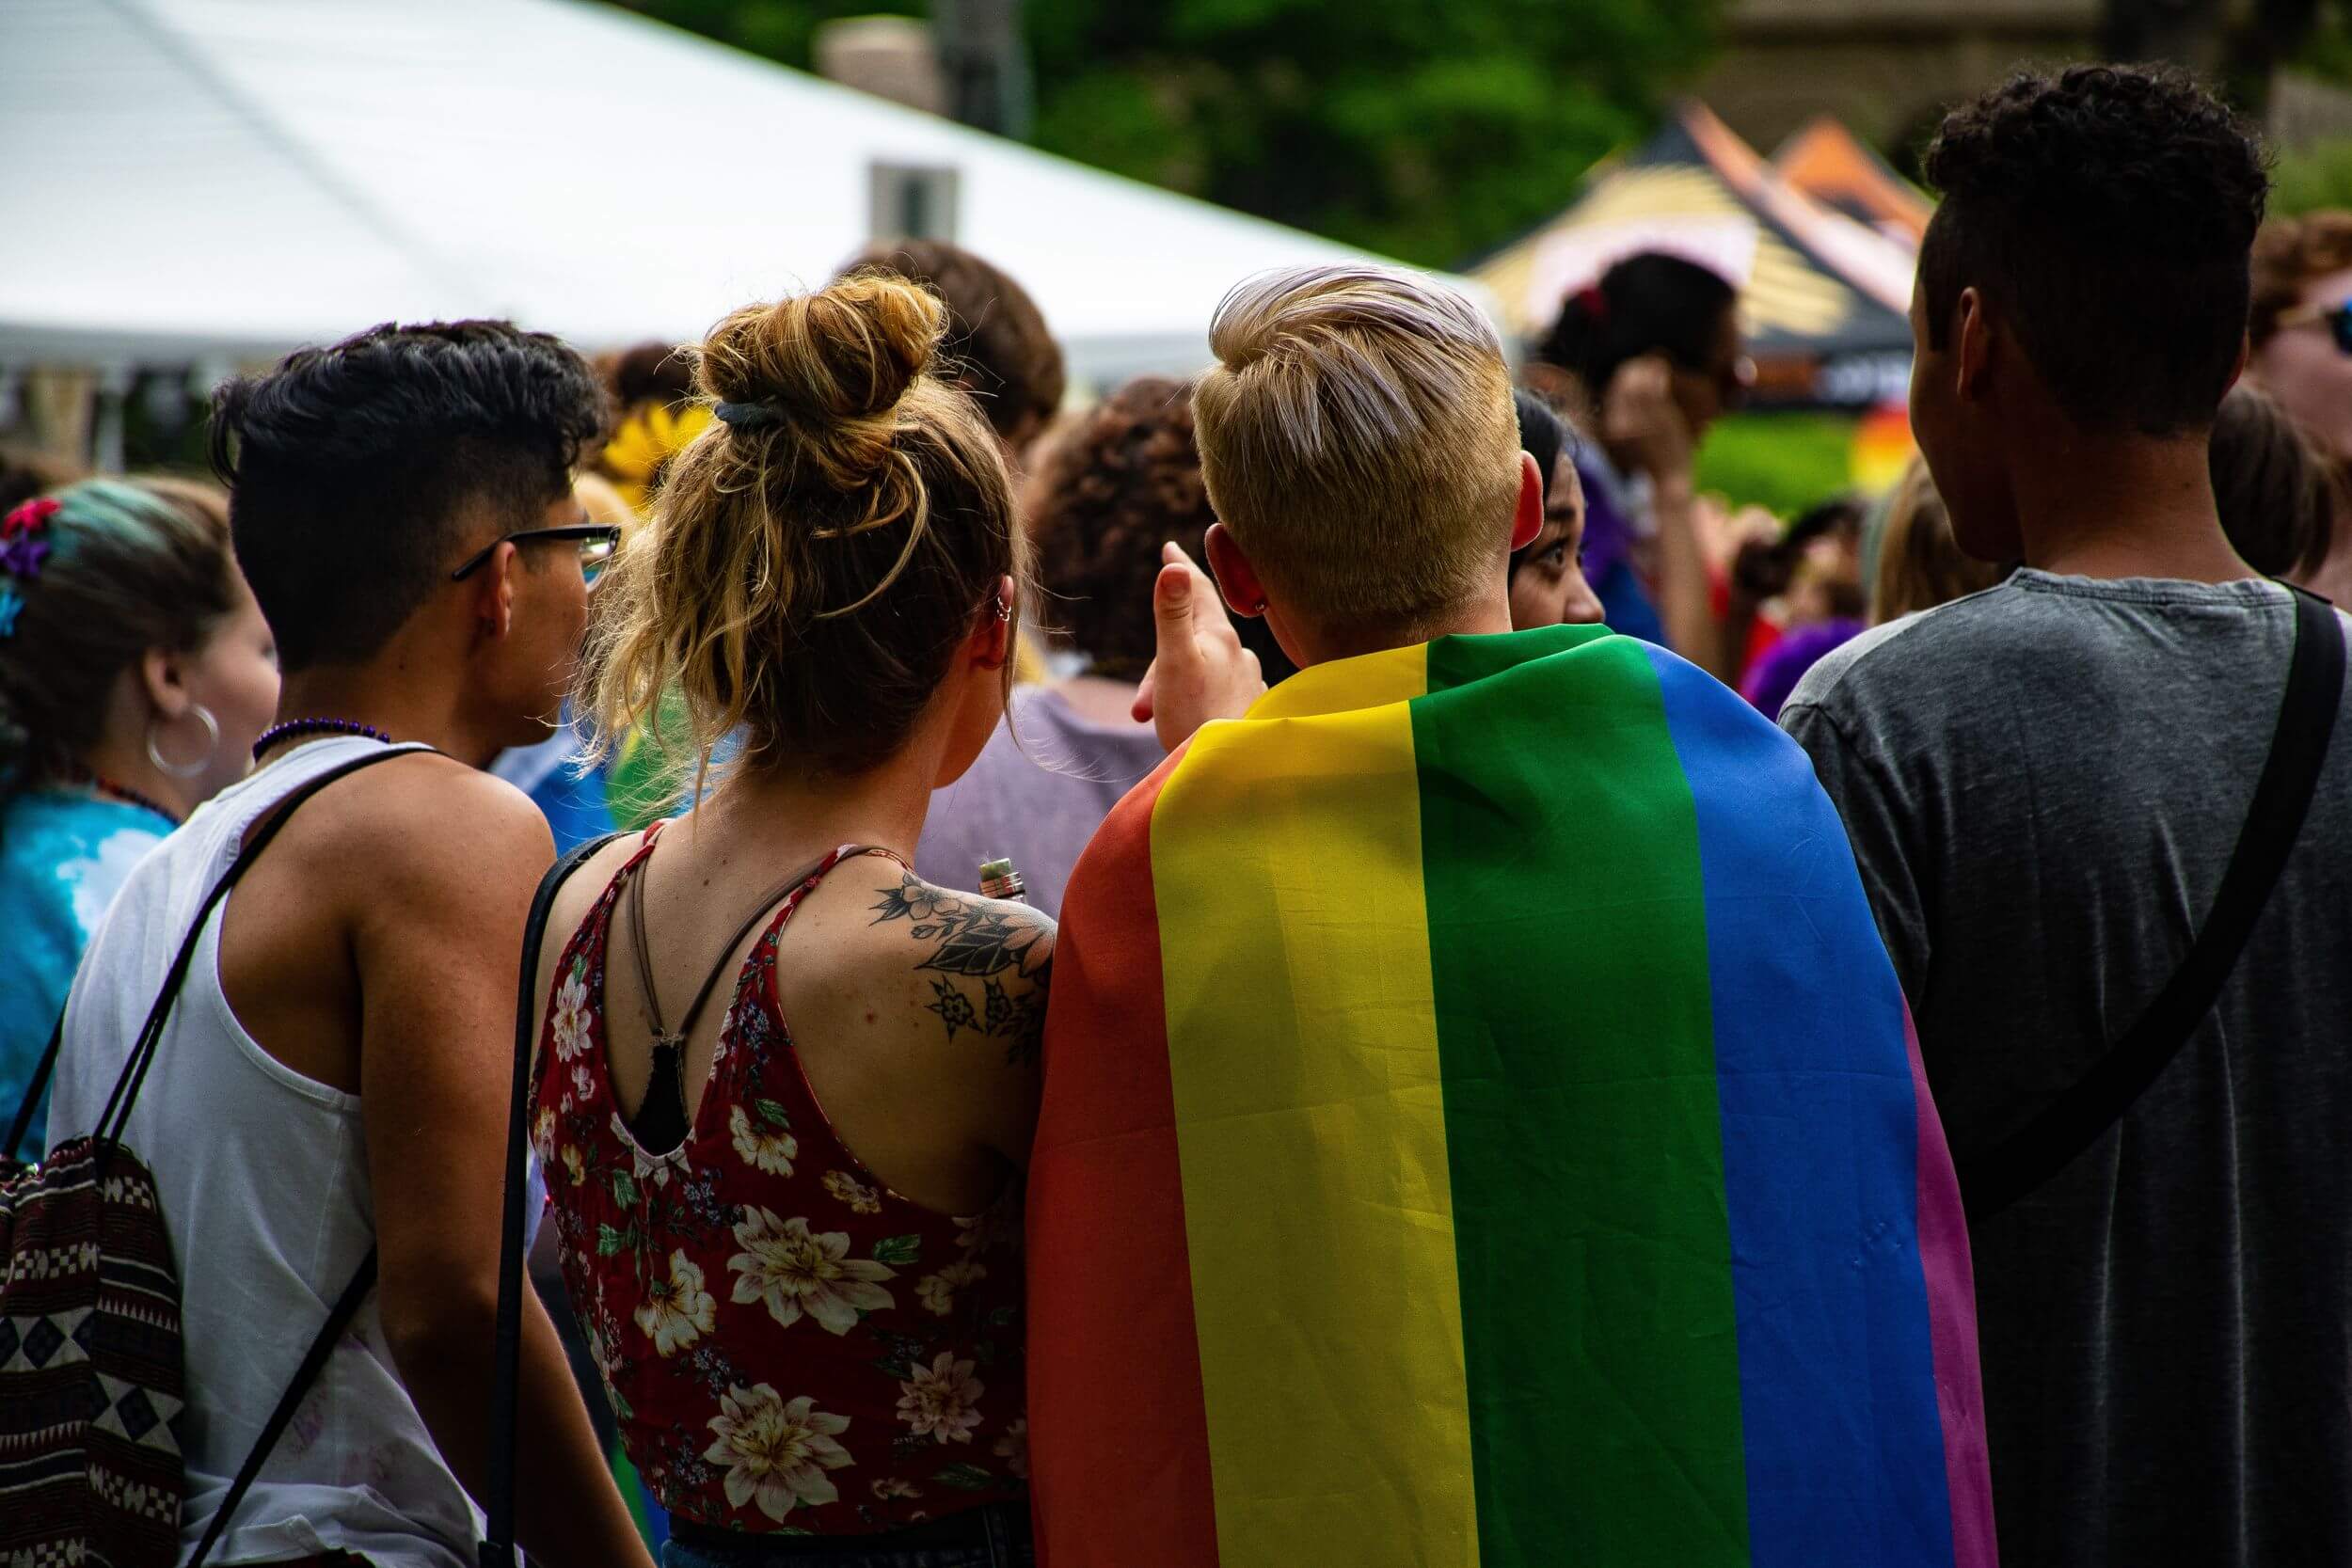 Four people stand at an outdoor event with their backs tuned. One of them has a pride flag draped around their shoulders.